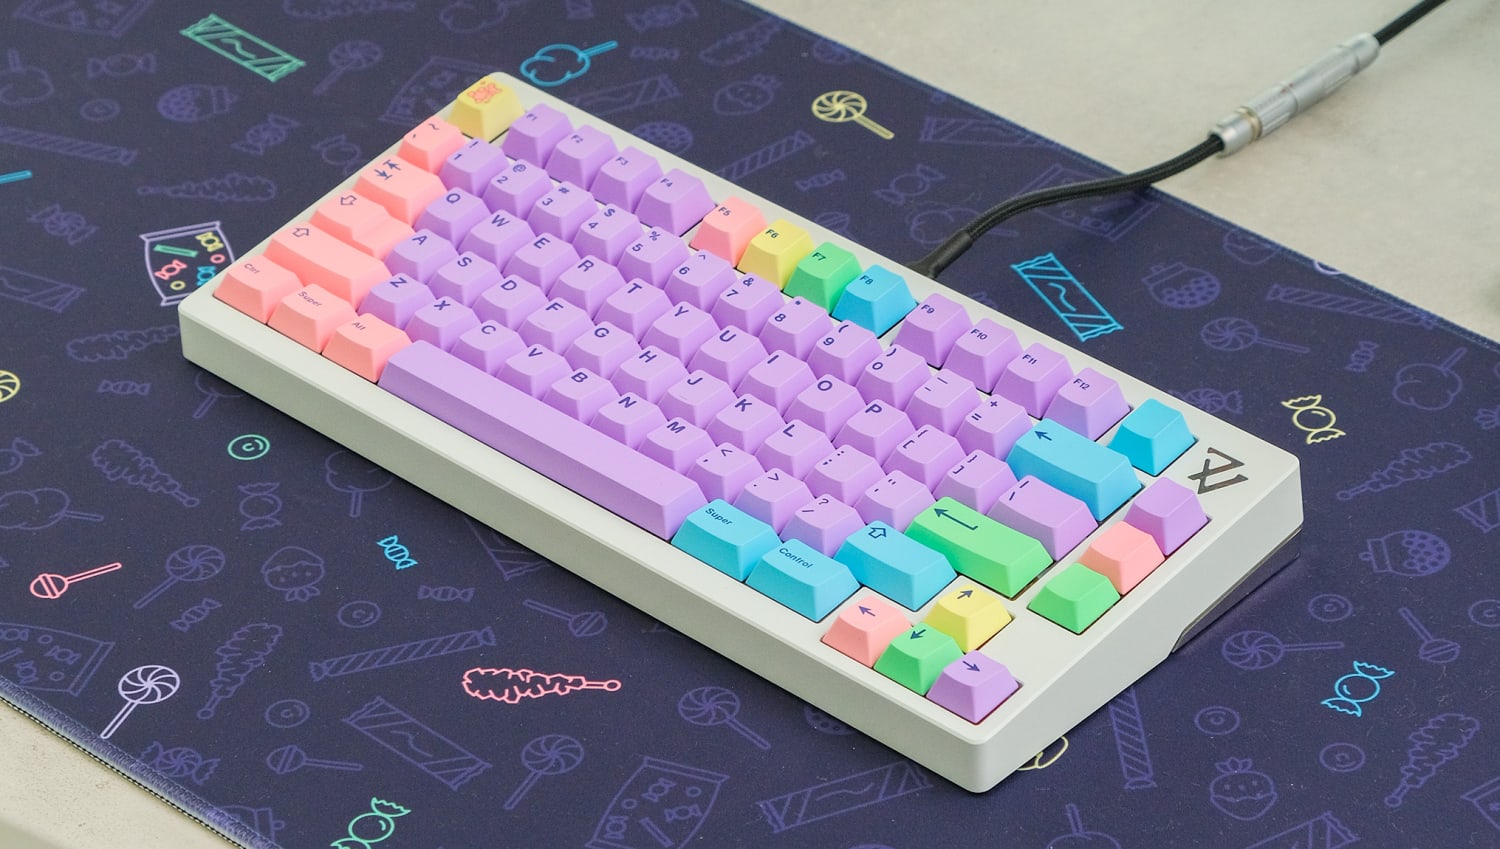 What to Look for When Buying Mechanical Keyboard Keycaps